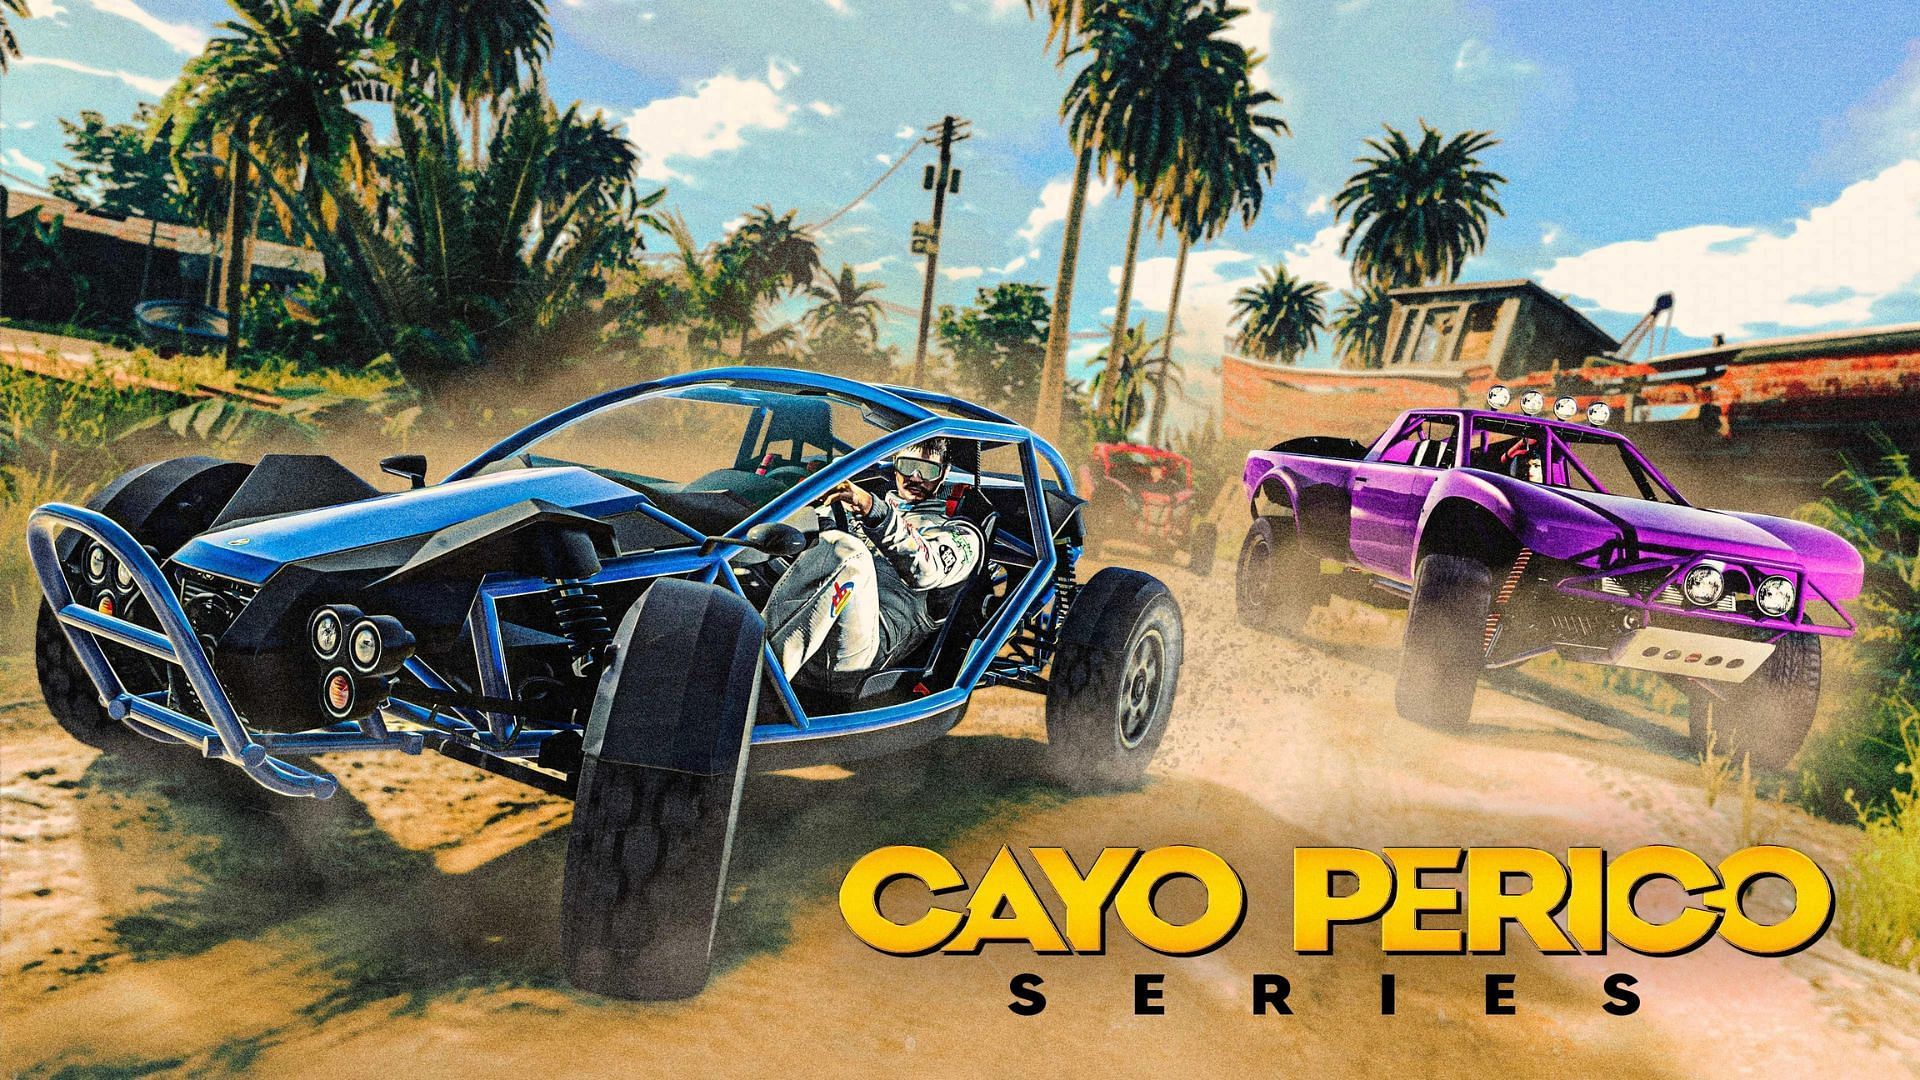 An official image of Cayo Perico Series (Image via Rockstar Games)